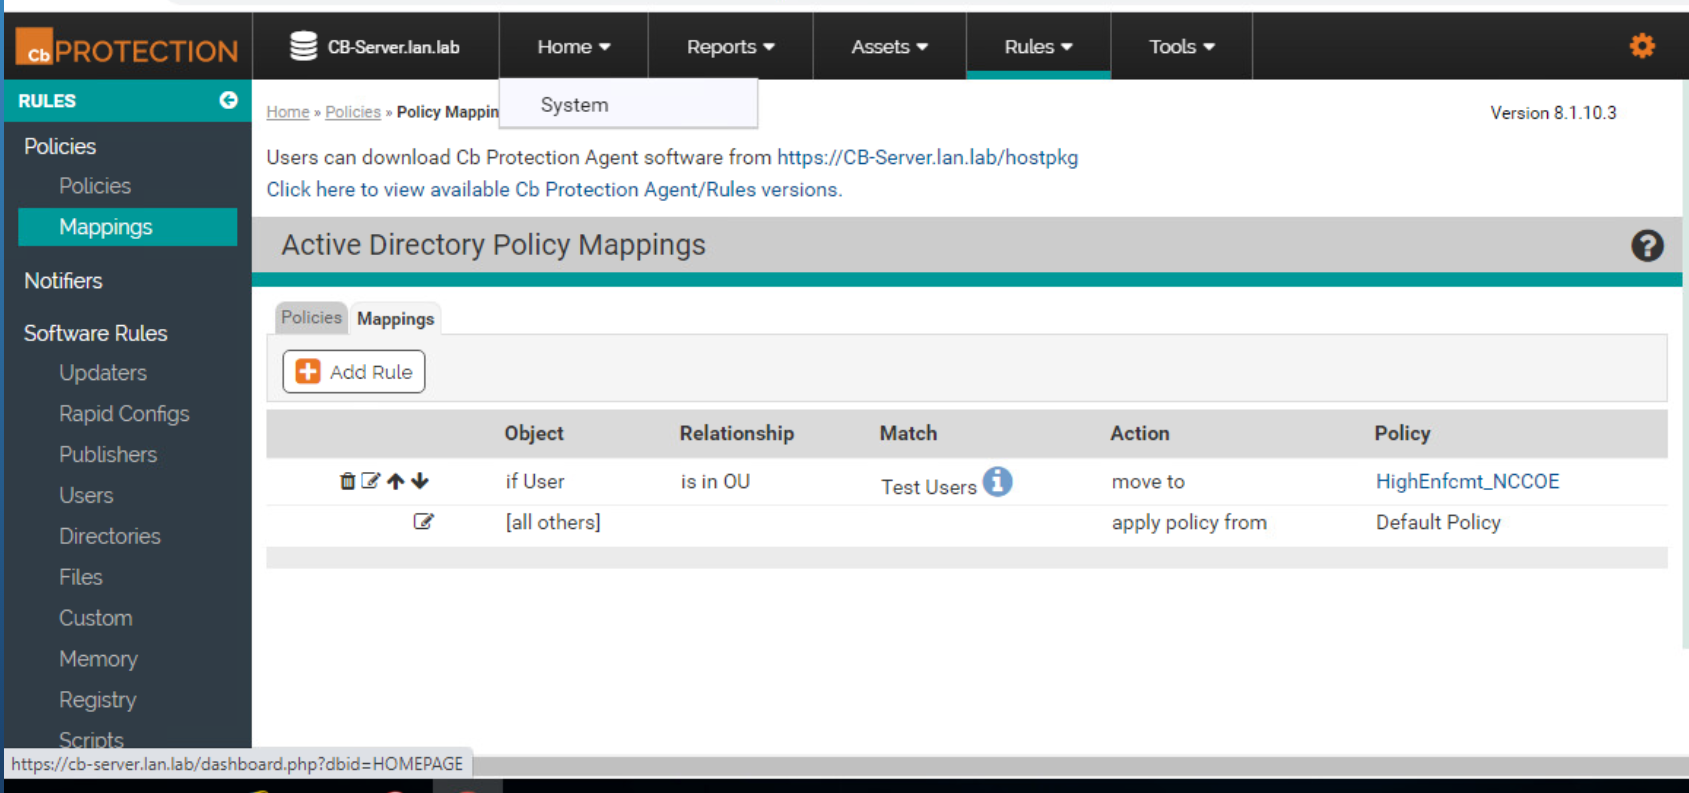 Image showing the policy mapping page where the High Enforcement policy is applied to the user accounts in the “Test Users” OU in Active Directory. All other users are assigned the “Default Policy”.